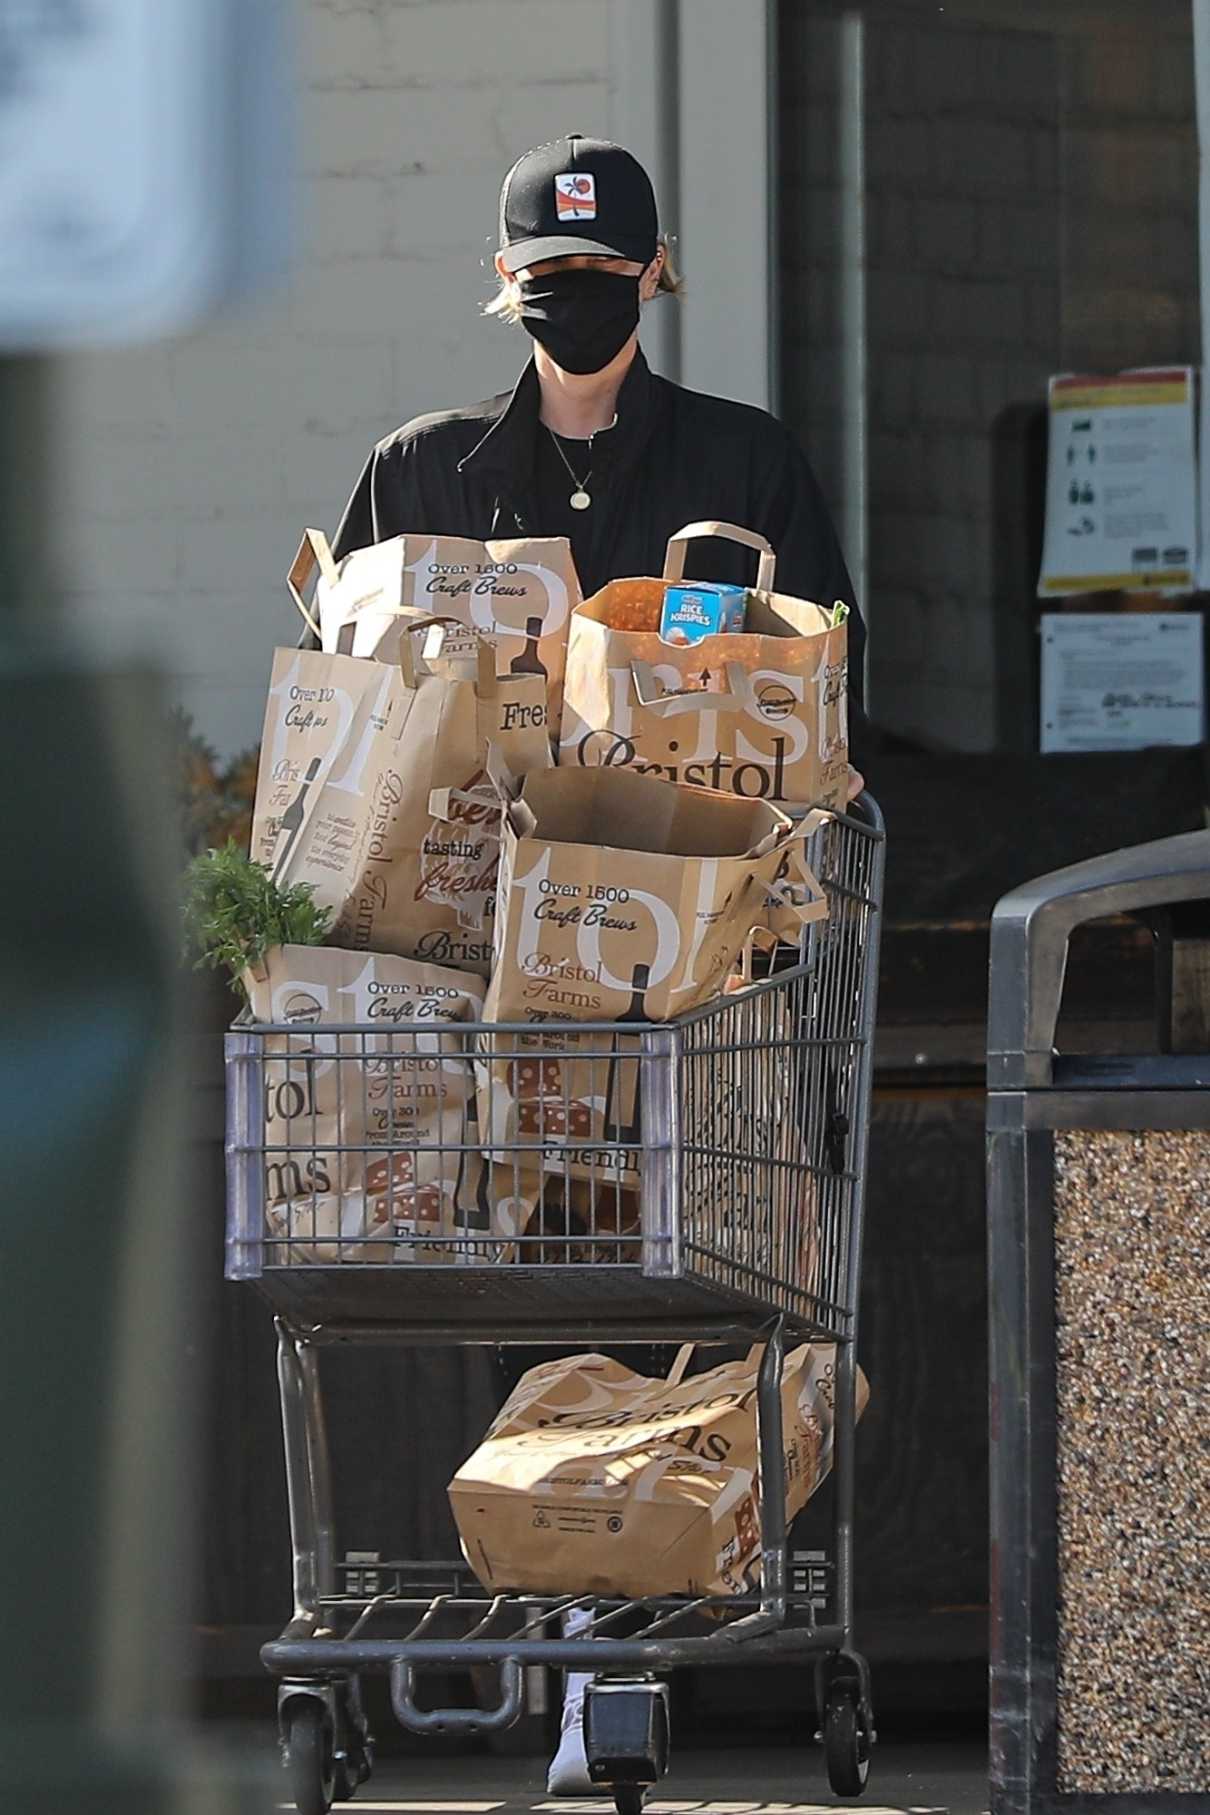 Charlize Theron in a Black Cap Stops by Bristol Farms for Groceries in ...